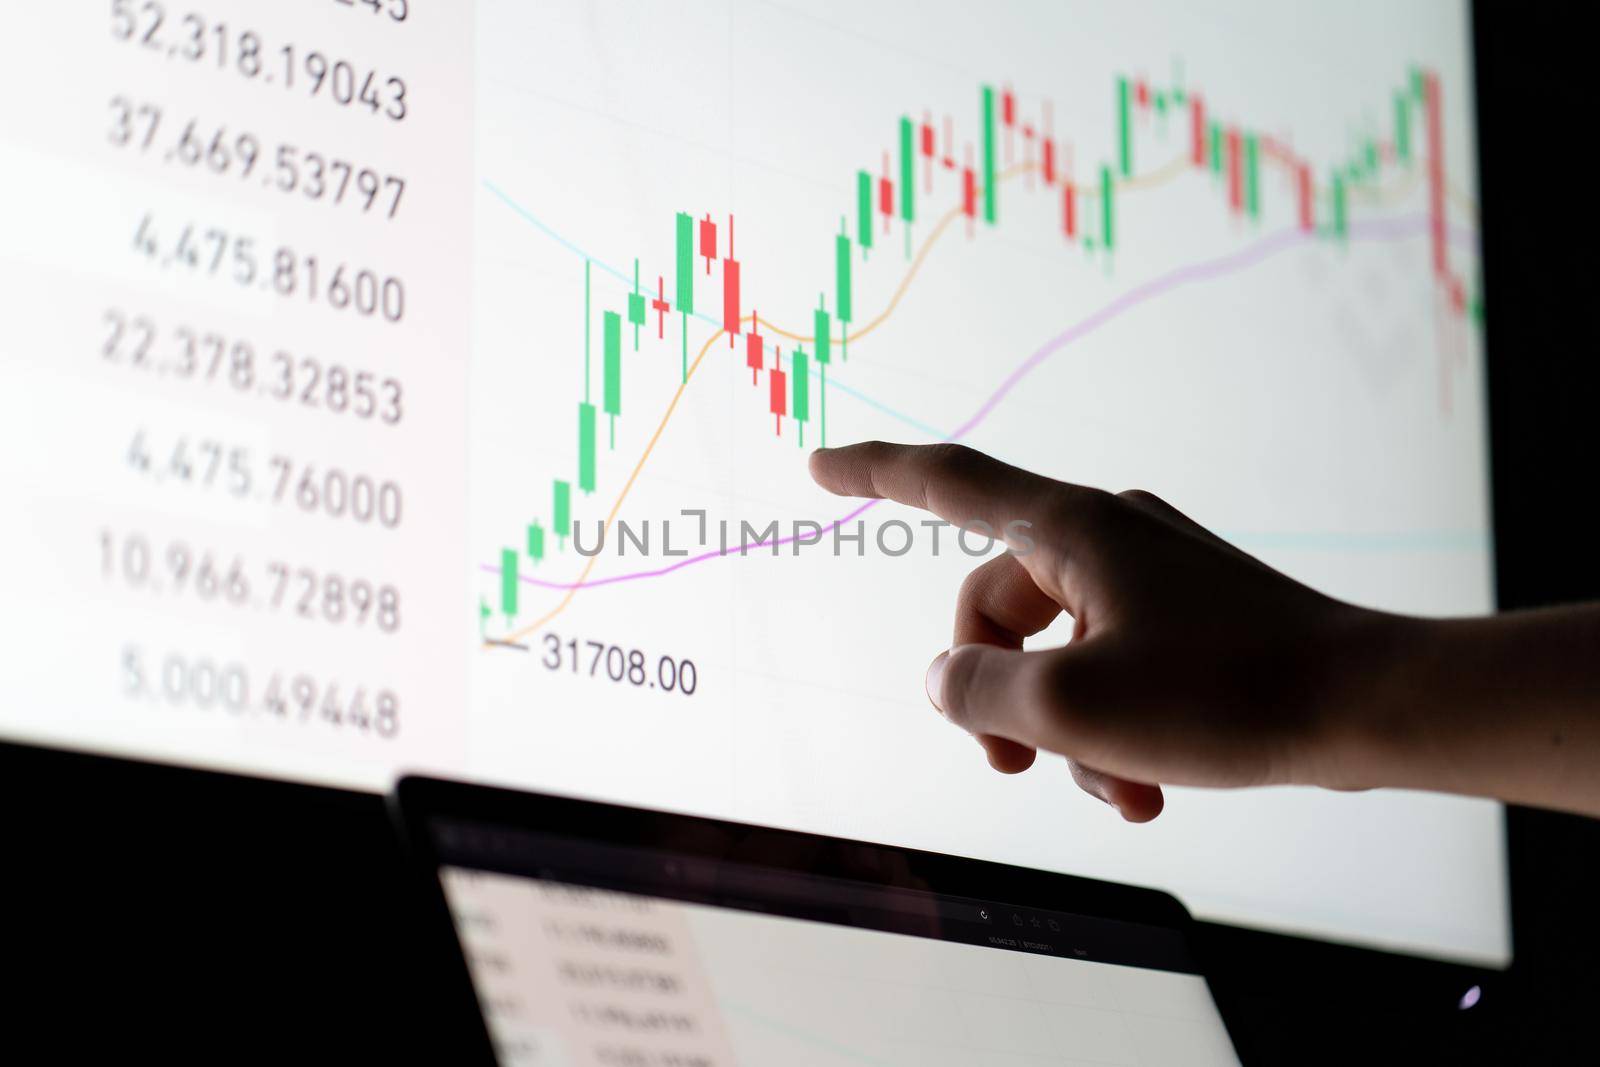 Crypto trader investor analyst looking at computer screen analyzing financial graph data on pc monitor, thinking of online stock exchange market .